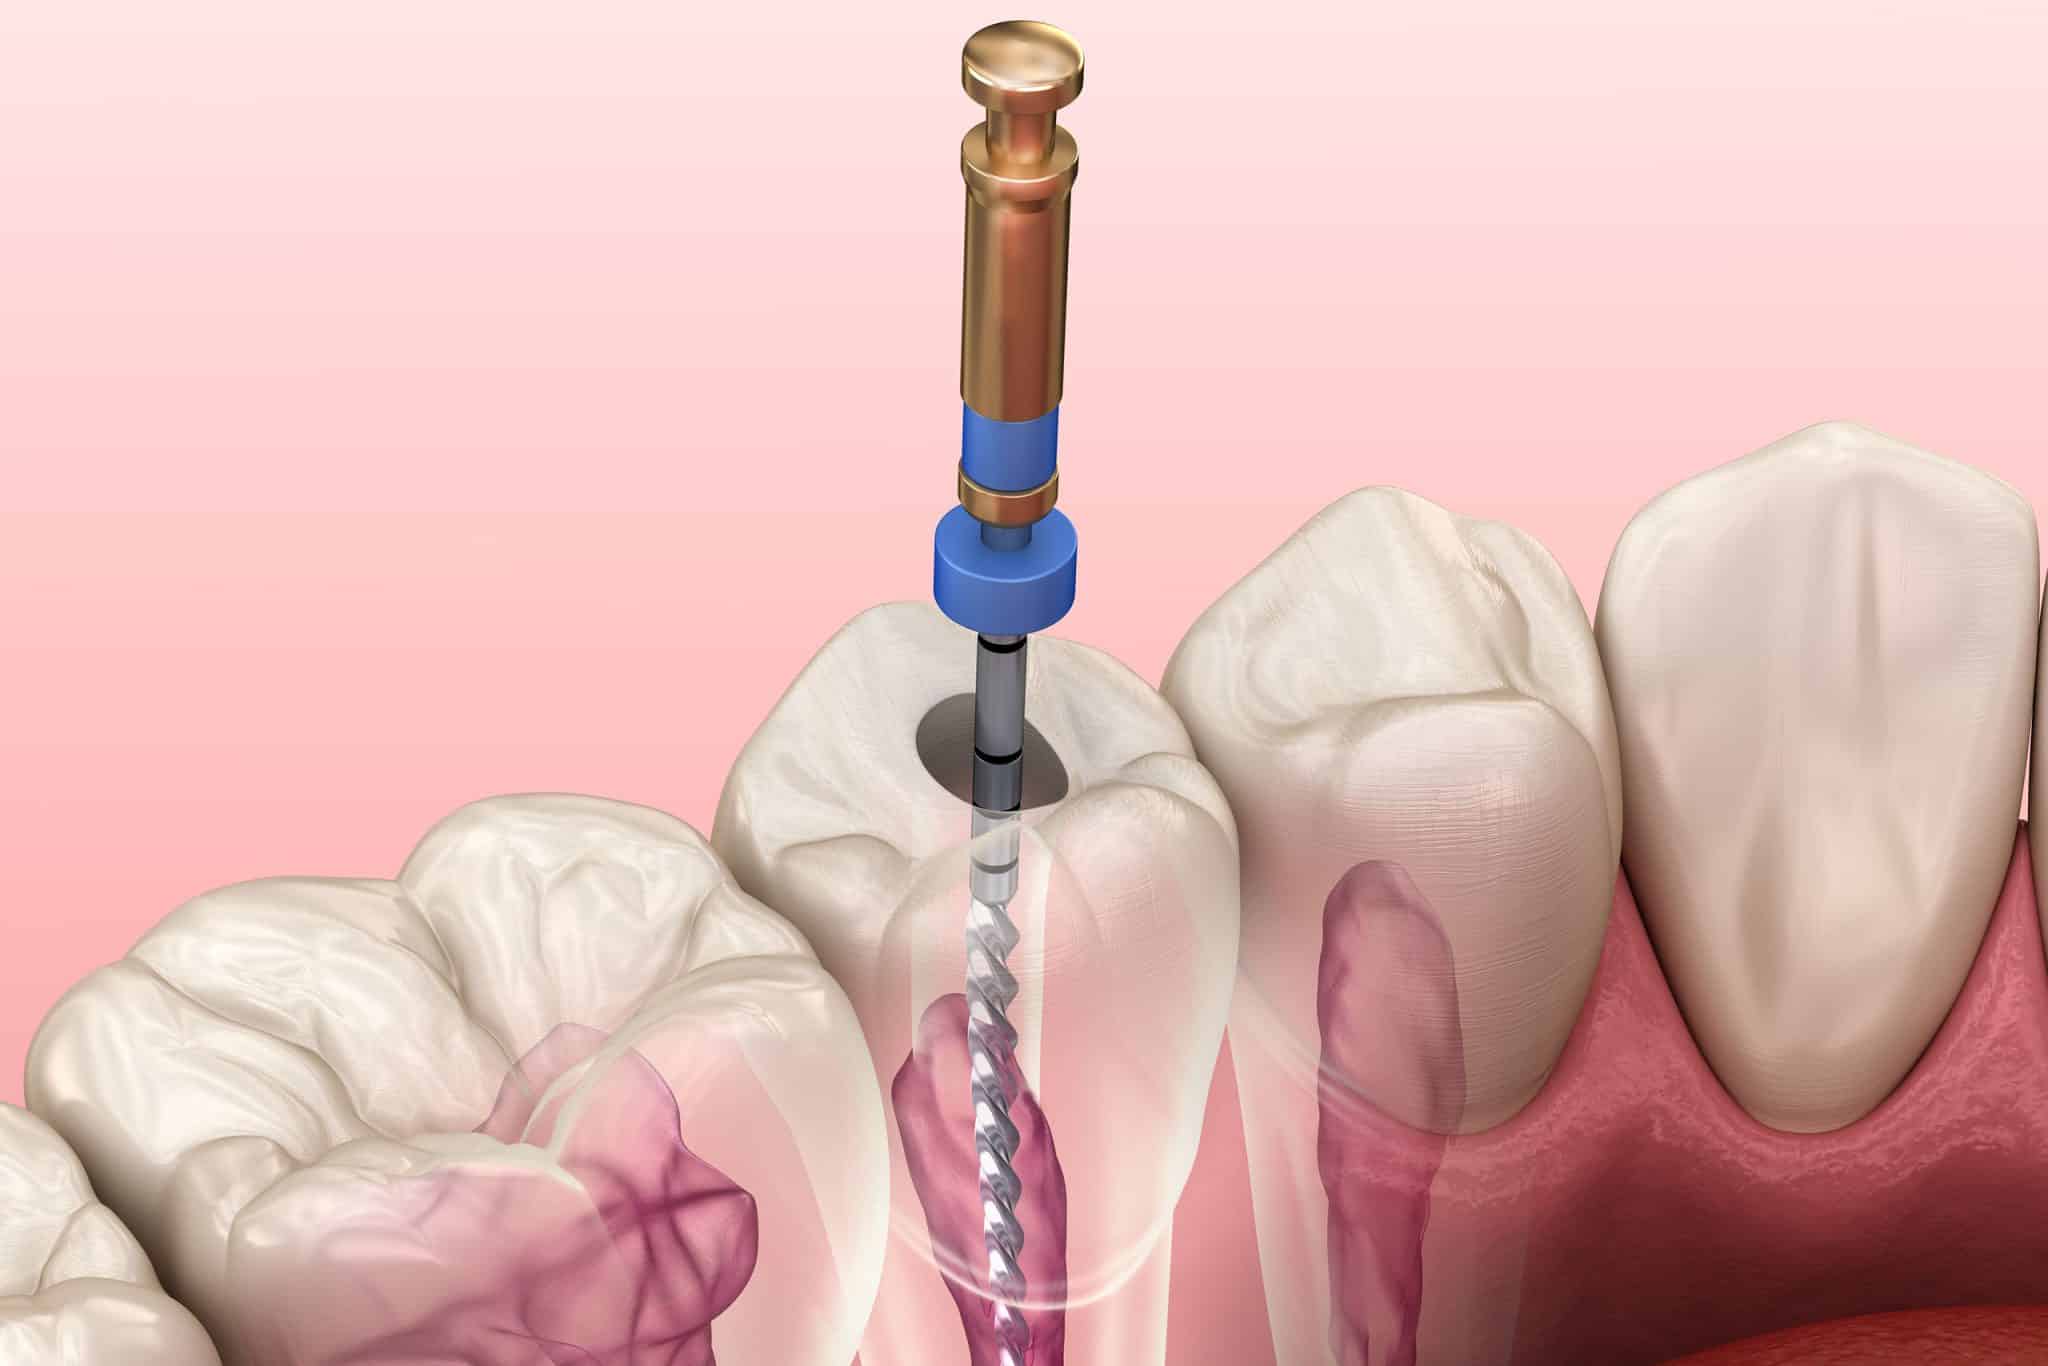 A rendering of a root canal procedure.